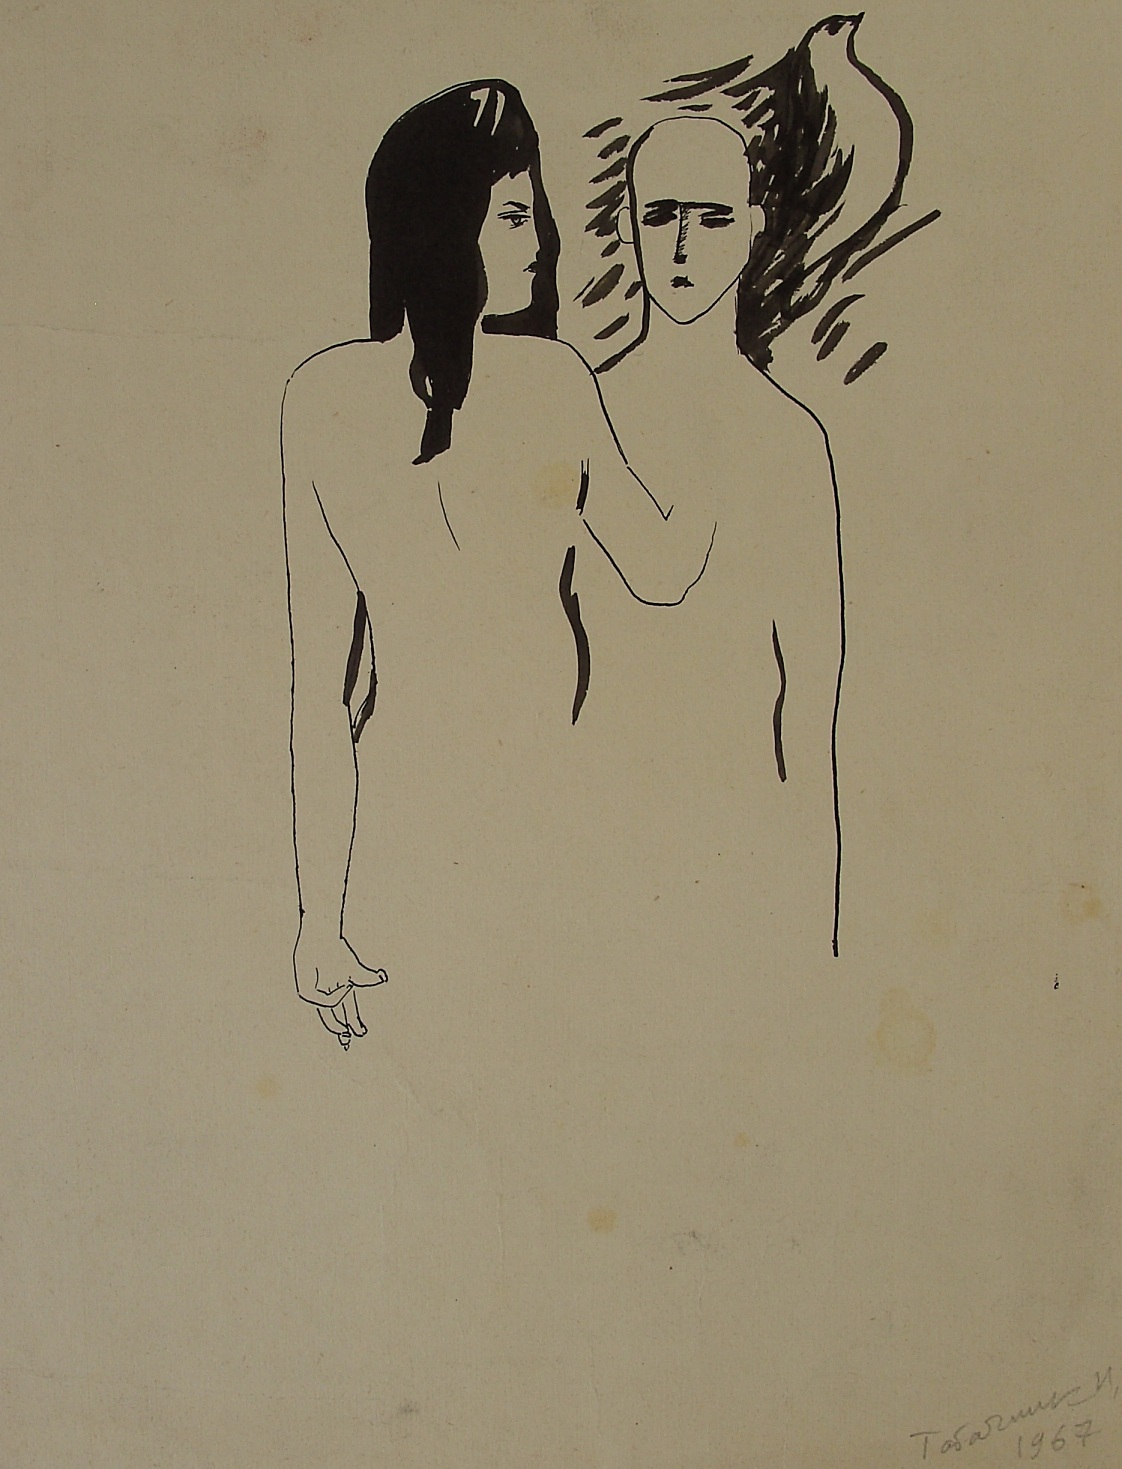 Youthful Dreams, 30x24, Paper, Indian Ink, 1968